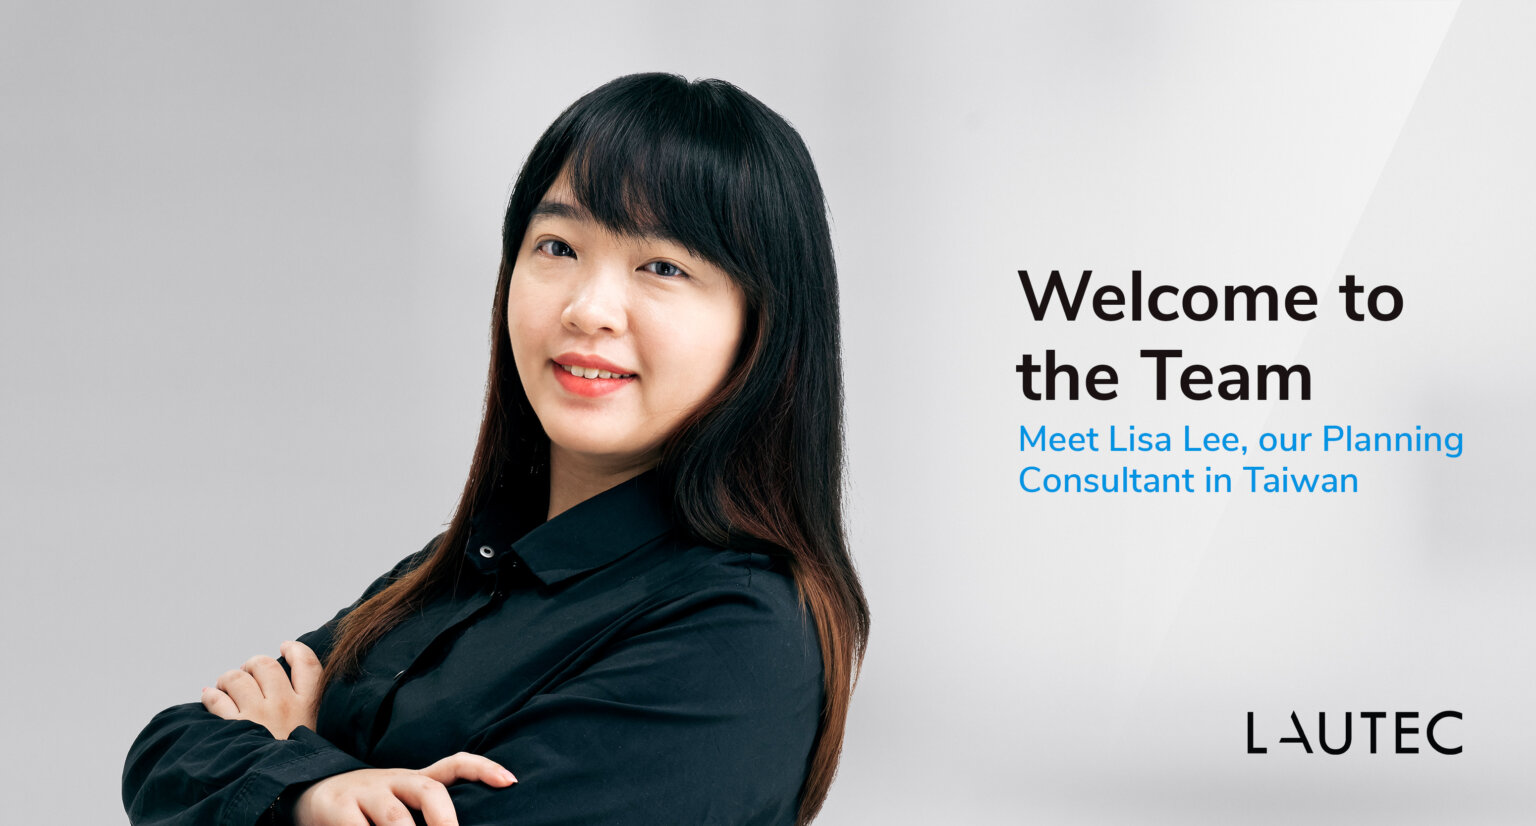 Lisa Lee joins LAUTEC as Planning Consultant